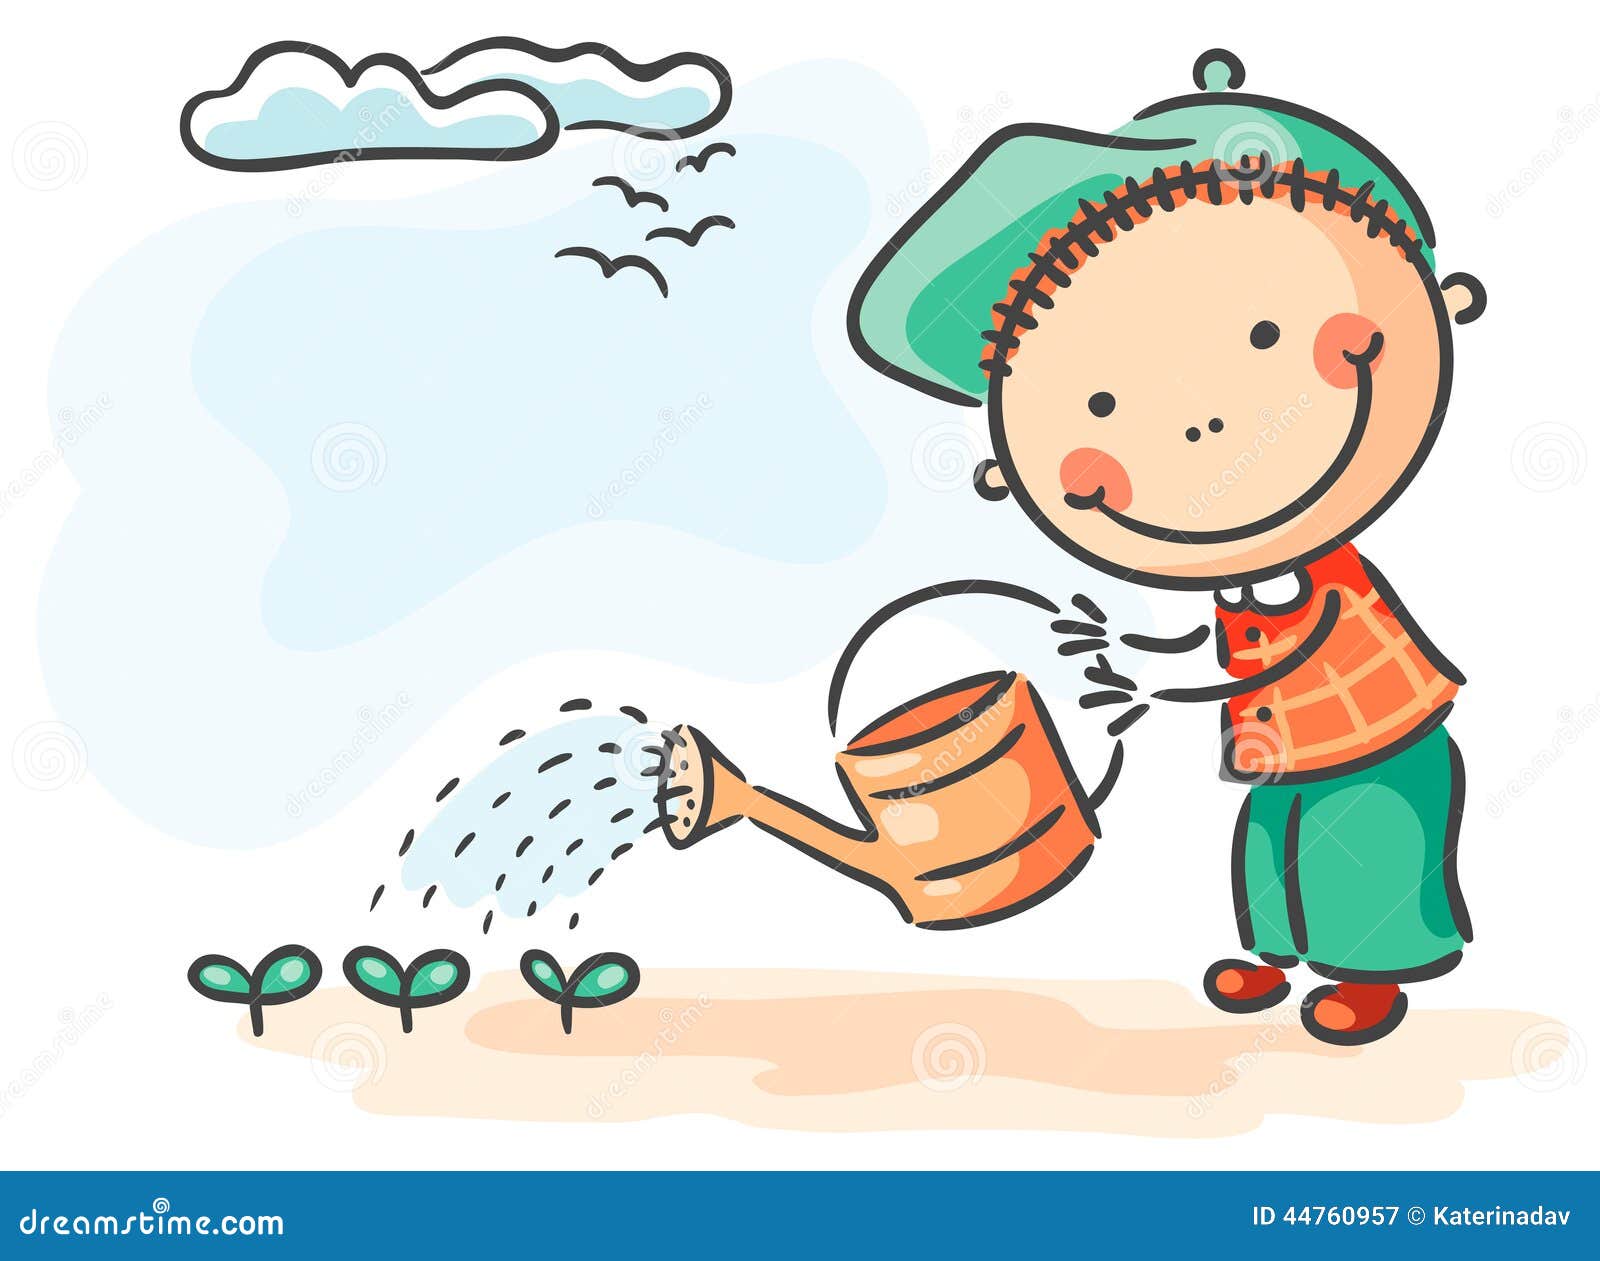 spring activities clipart - photo #4